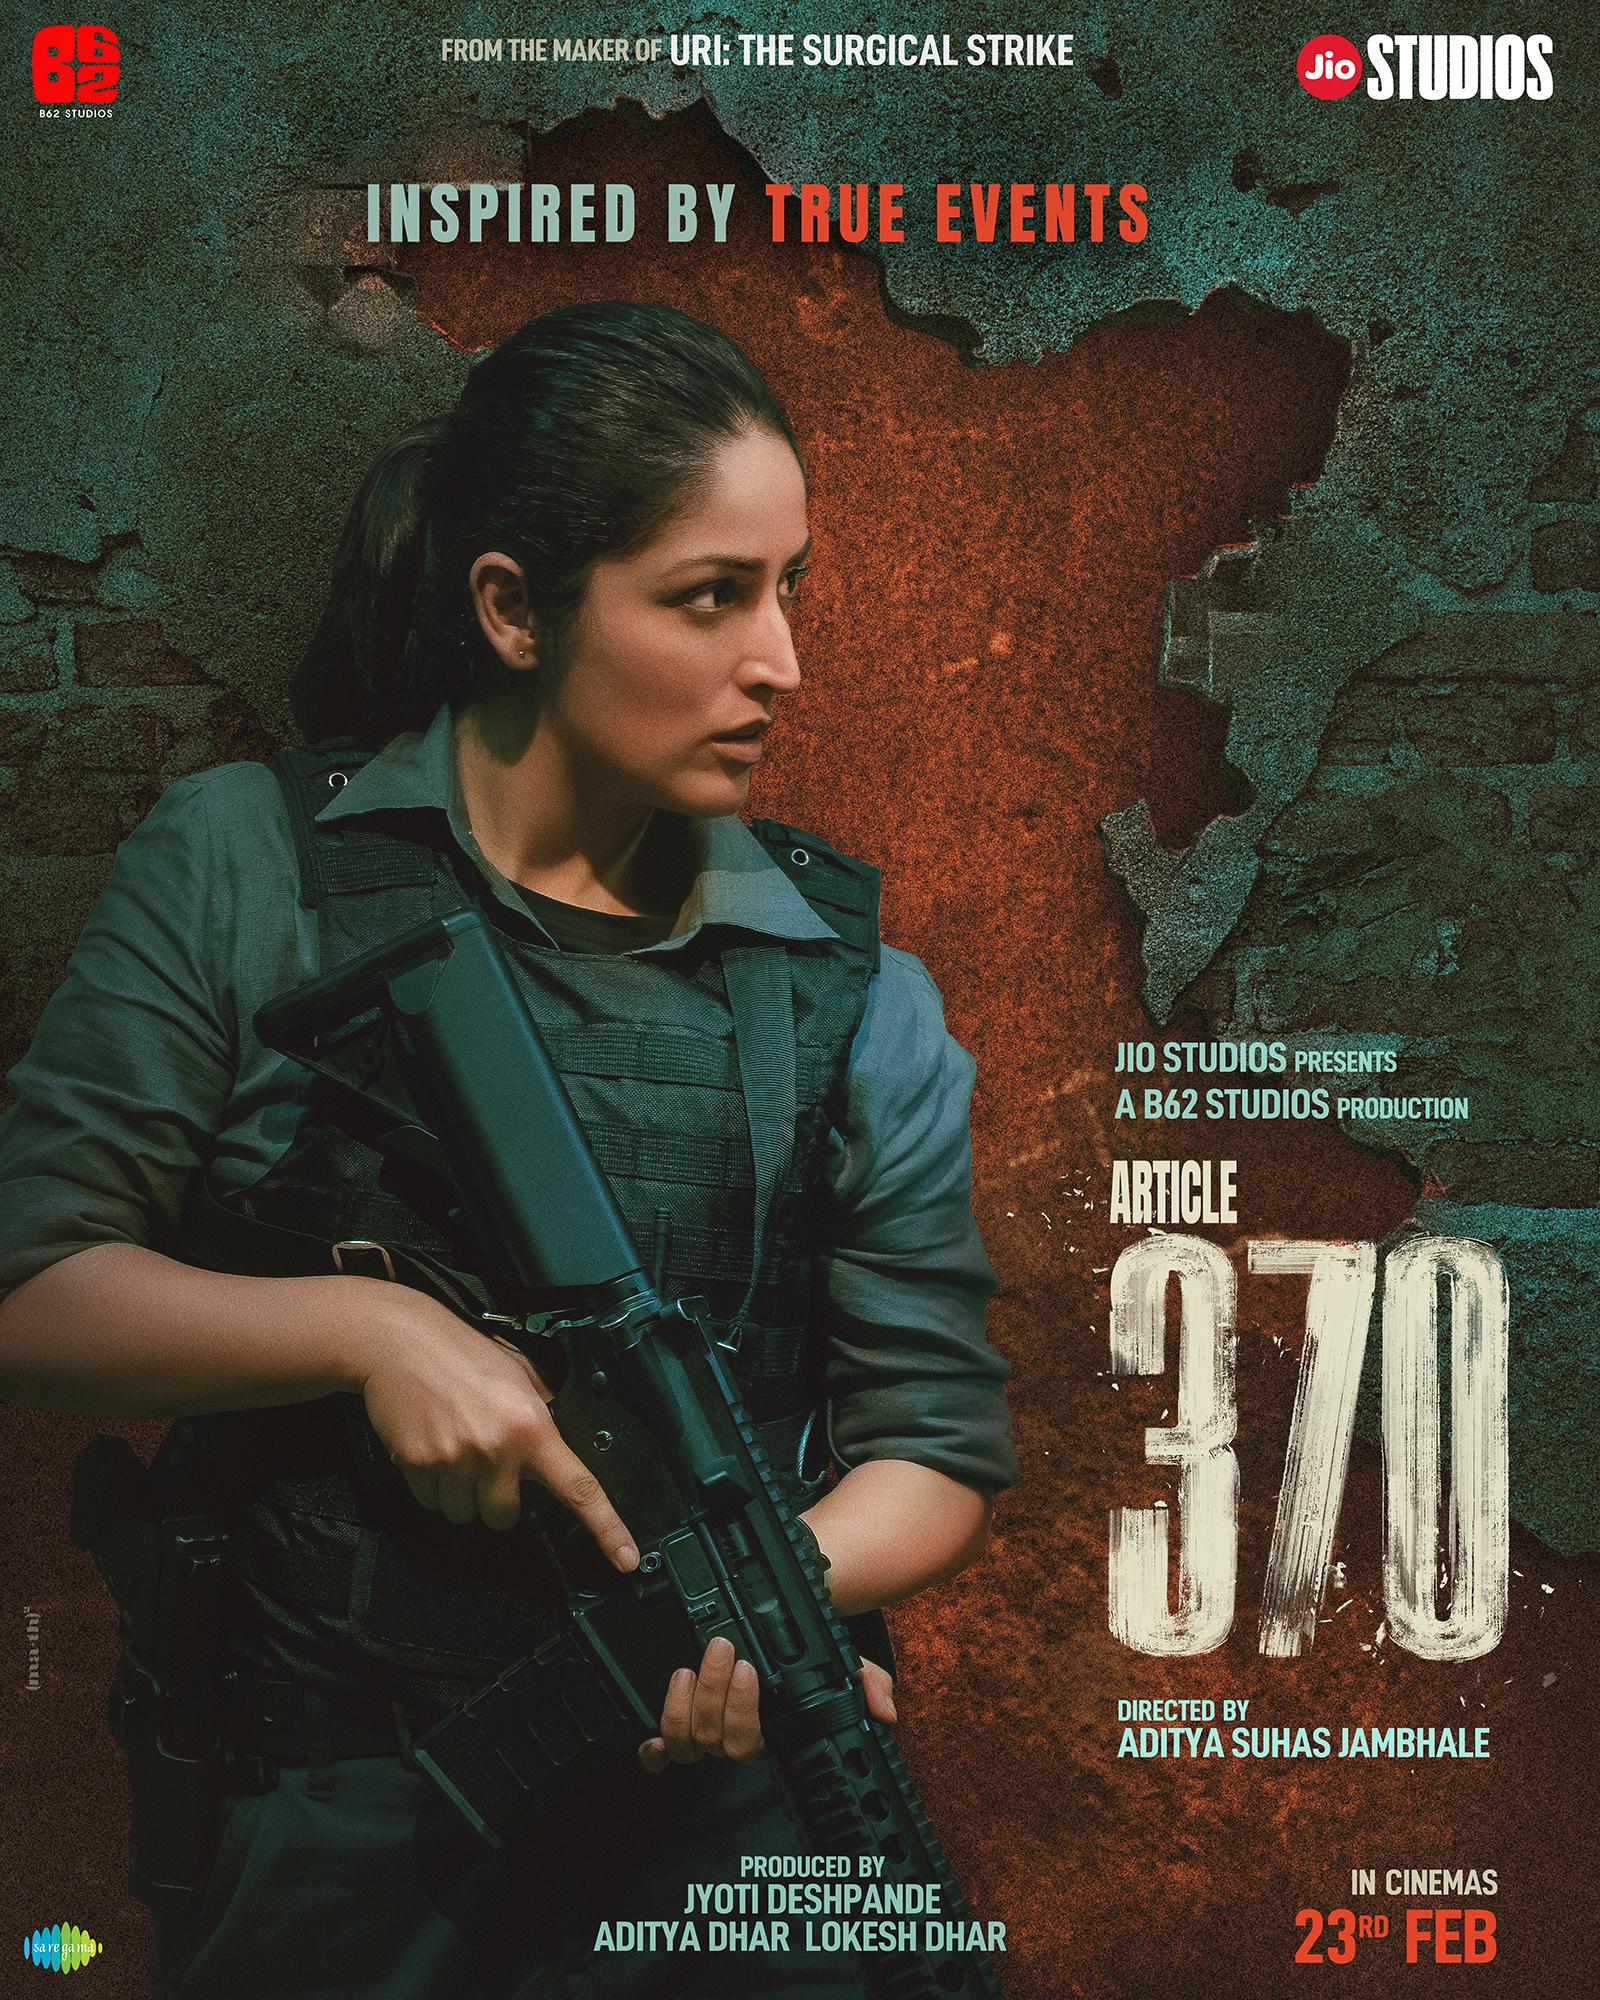 ‘Article 370’ Film Review